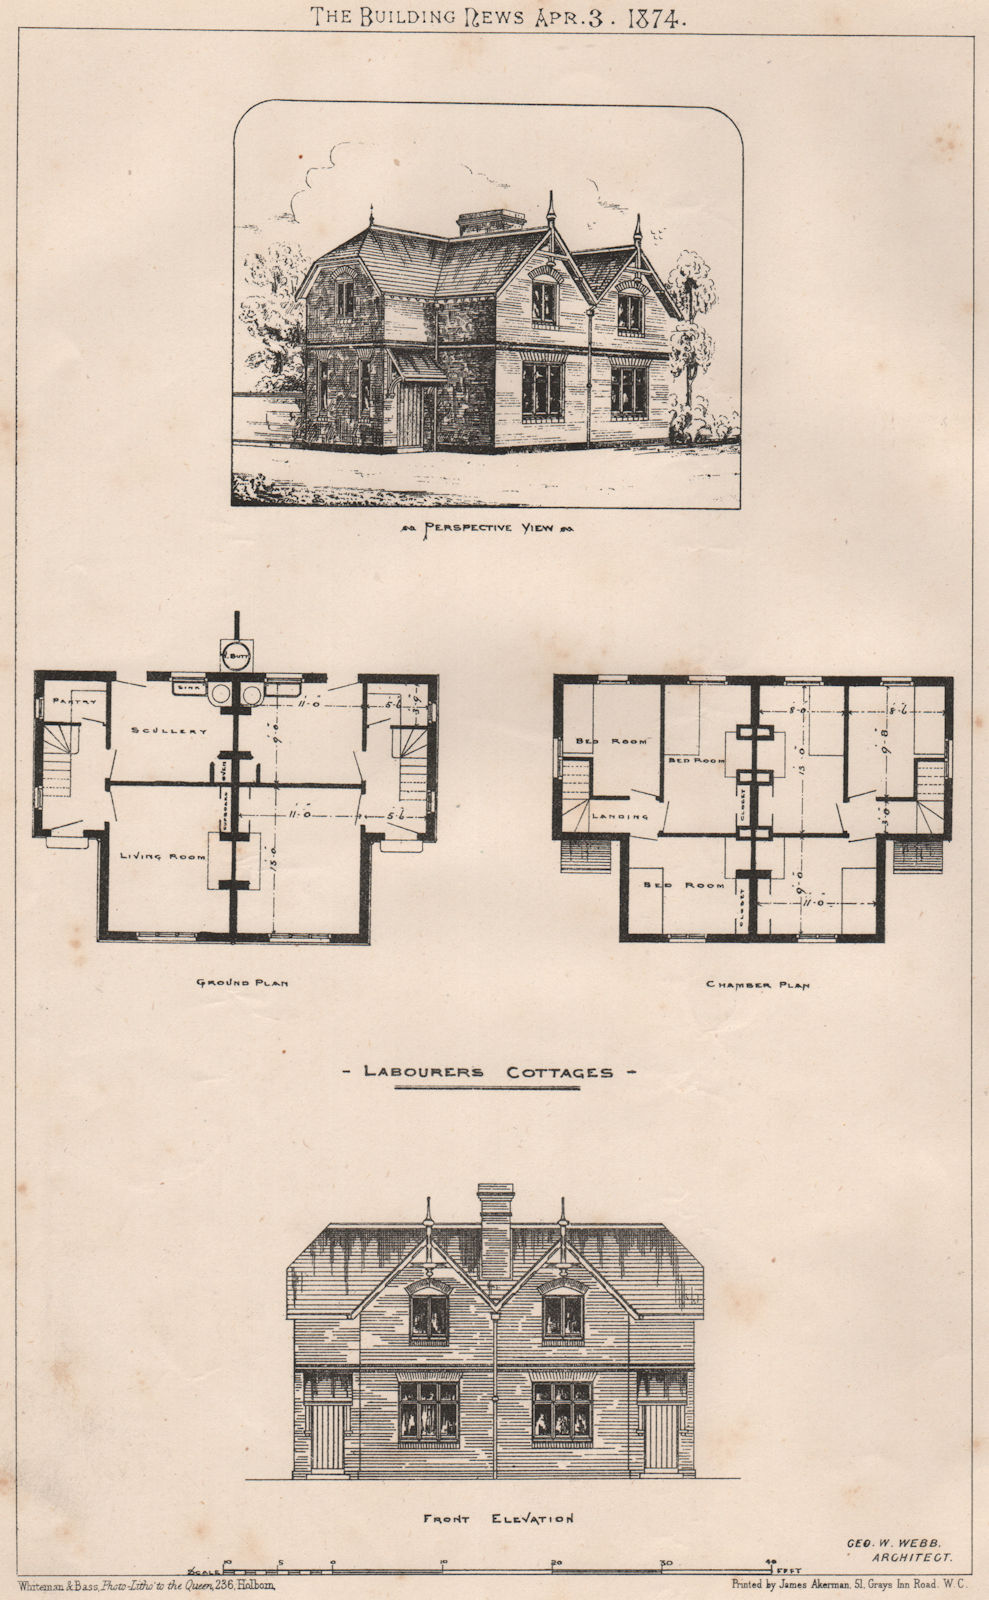 Associate Product Labourers cottages; Geo W. Webb, Architect. Architecture 1874 old print